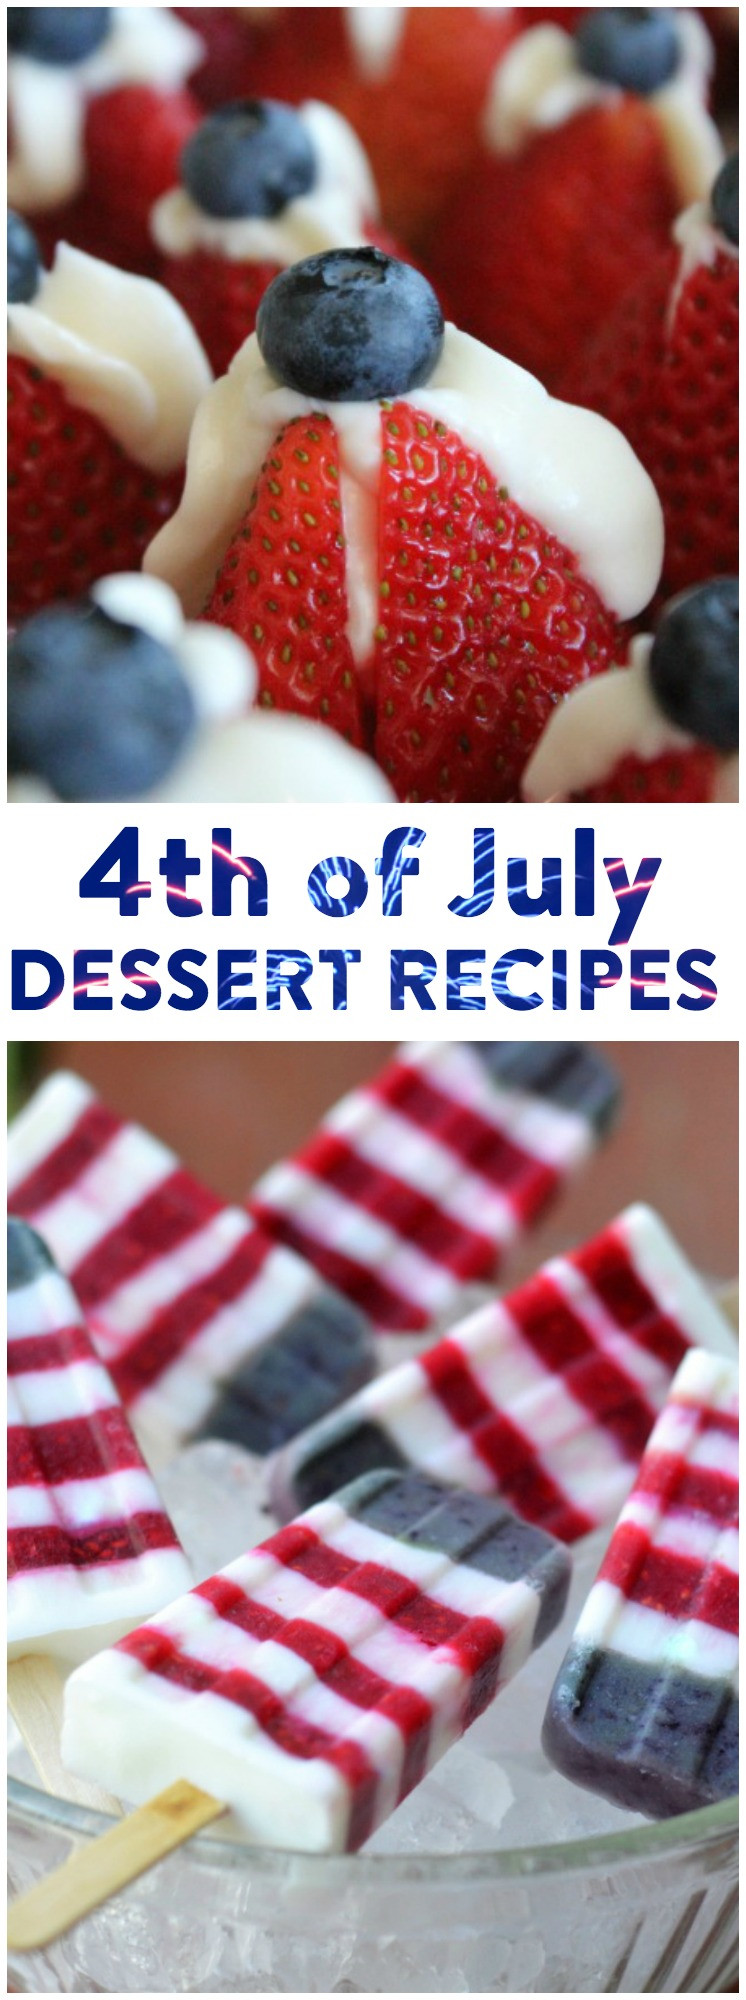 Best 4Th Of July Desserts
 The Best 4th July Dessert Recipes A Little Craft In